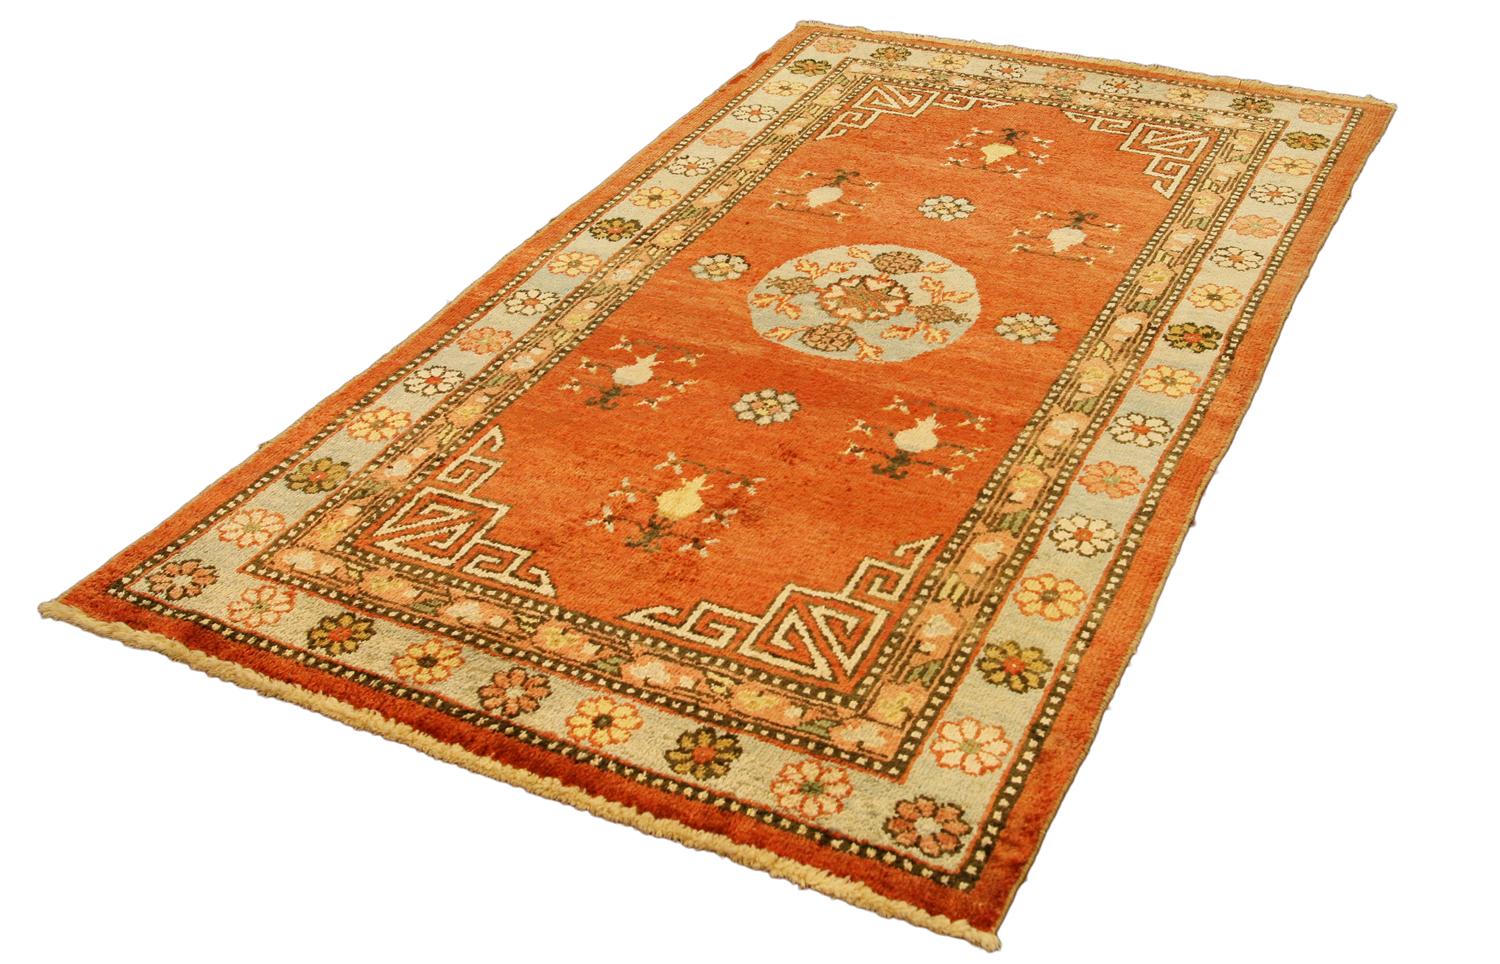 This is a silk antique Khotan from East Turkestan seamlessly woven circa 1920. This brilliant silk Khotan undoubtedly has an extraordinary floral design and a unique color palette of rust and red. Silk Khotan rugs are extremely beautiful and highly